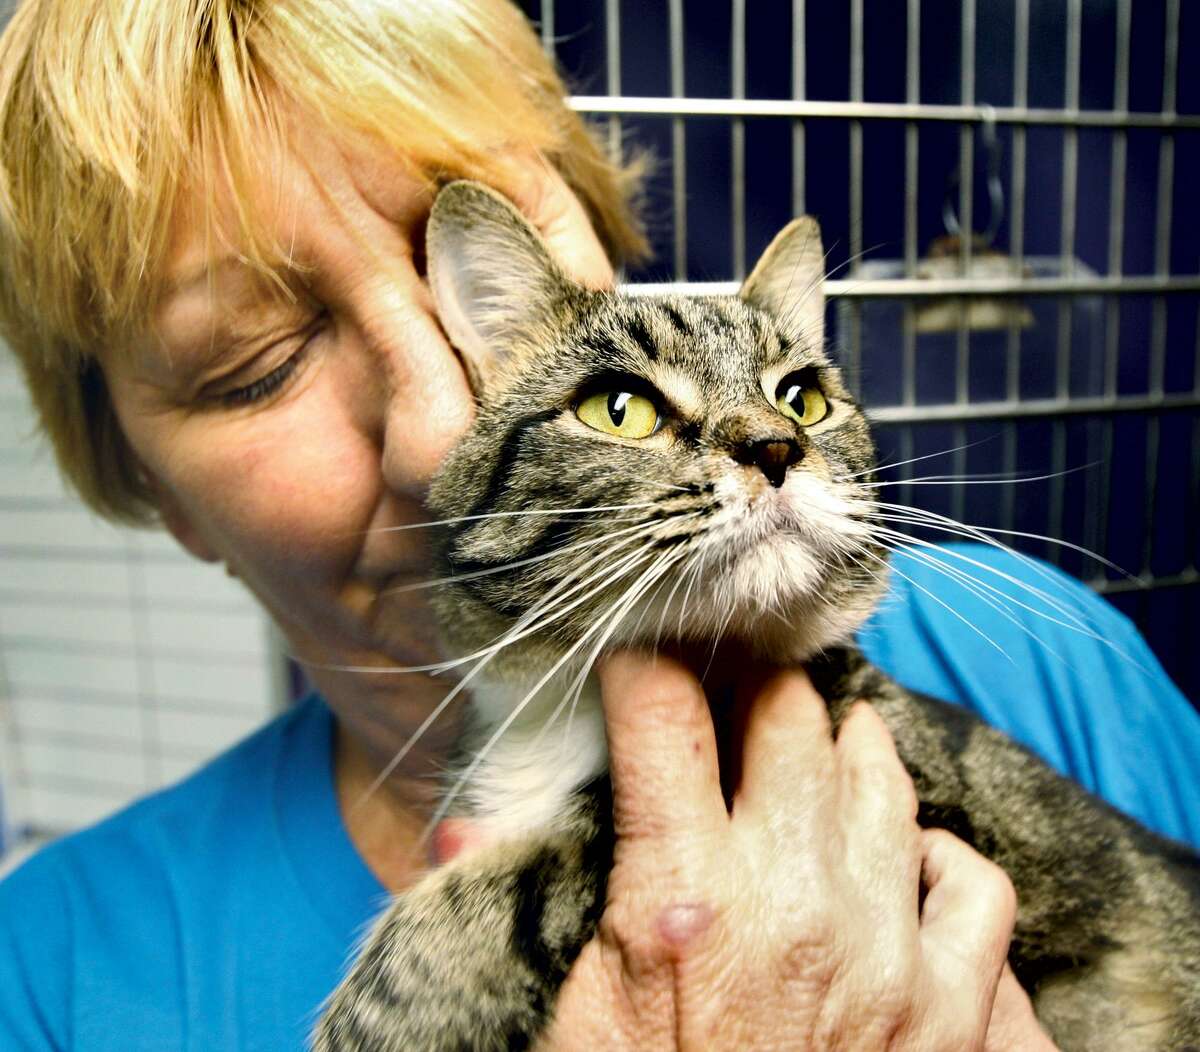 Kathy Turner, executive director of the Metro East Humane Society in Edwardsville, Ill., gives some loving contact Tuesday Oct. 16, 2012, to one of at least 52 cats, and three dogs, seized by Edwardsville Police from an upscale home on Birdie Court behind the Sunset Hills Country Club. The adult cat was one of the luck ones, others were suffering from signs of neglect. Police executed a search warrant Monday and were still on the scene Tuesday looking for animals. (AP Photo/The Telegraph, John Badman) THE NEWS-DEMOCRAT AND THE POST-DISPATCH OUT